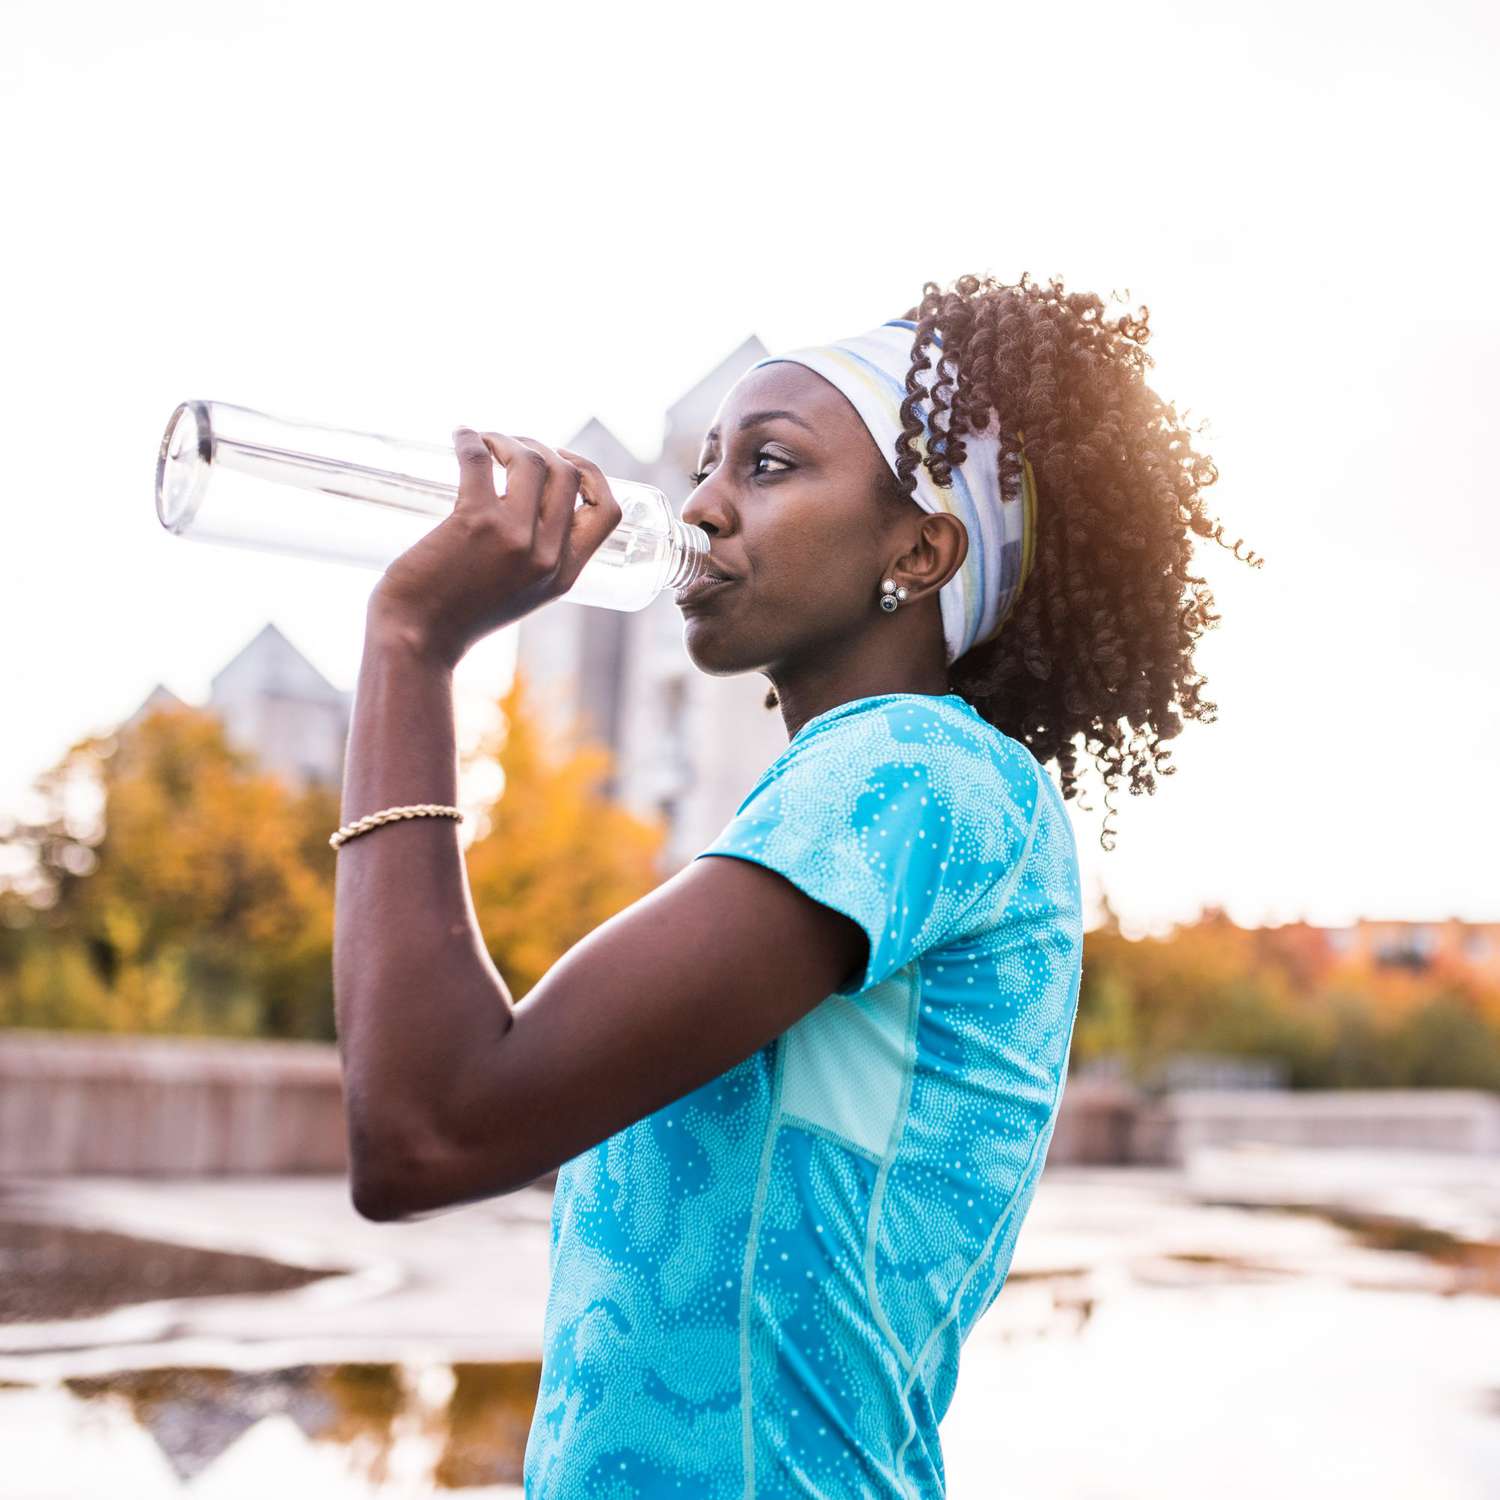 Woman_Drinking_Water_After_Exercising